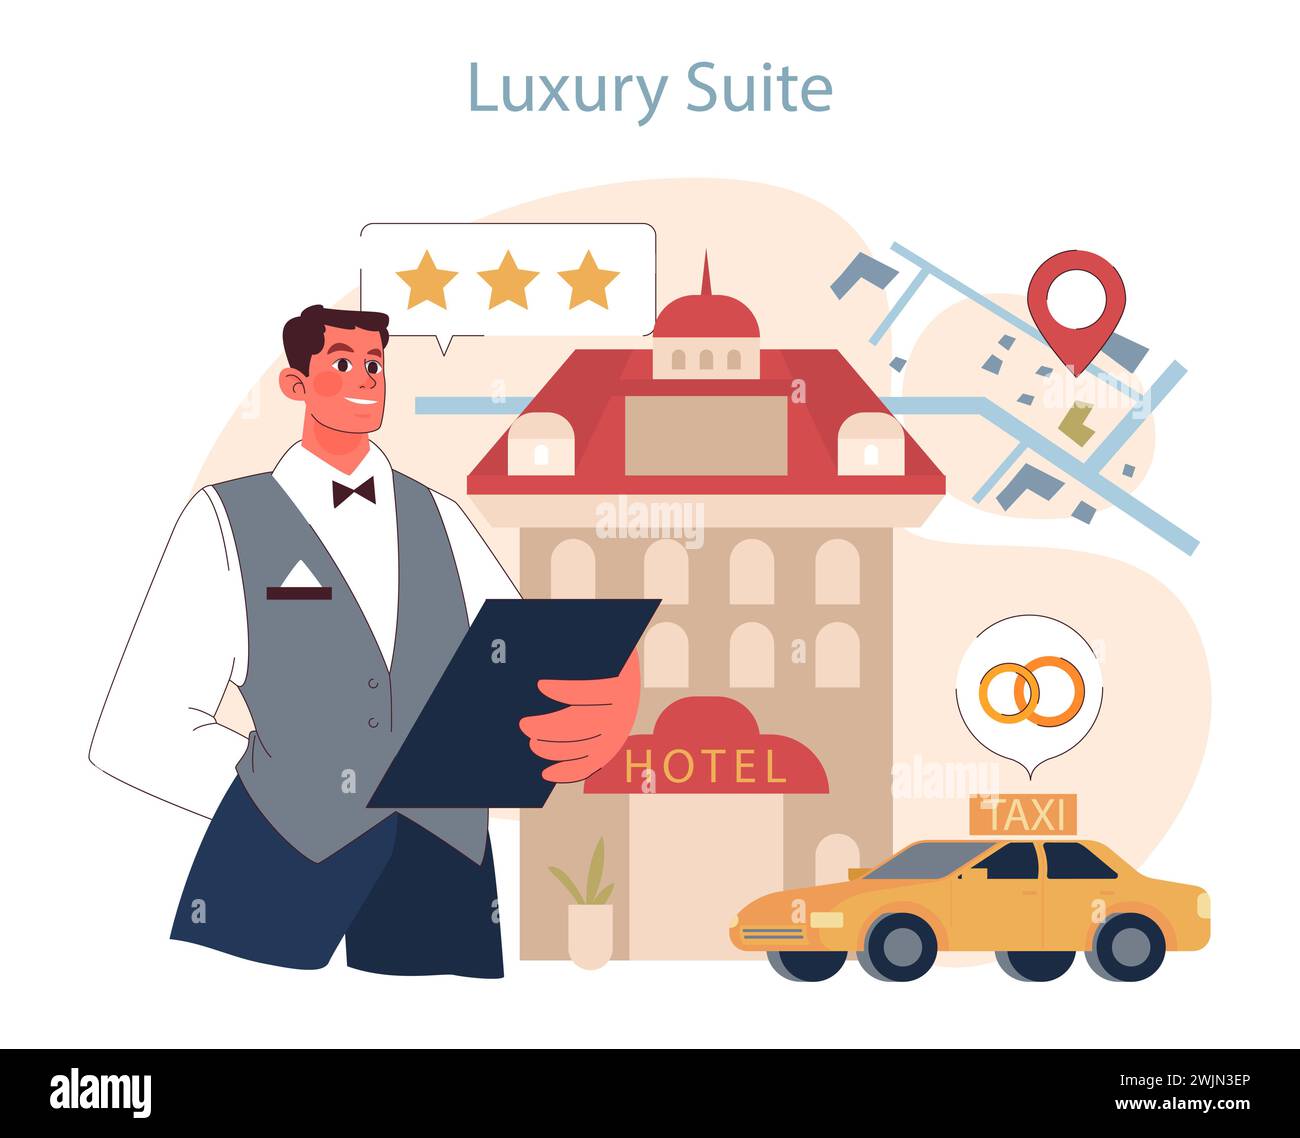 Luxury Suite concept. A beaming concierge welcomes guests to a sumptuous stay, where top-tier service meets elegance. Stock Vector